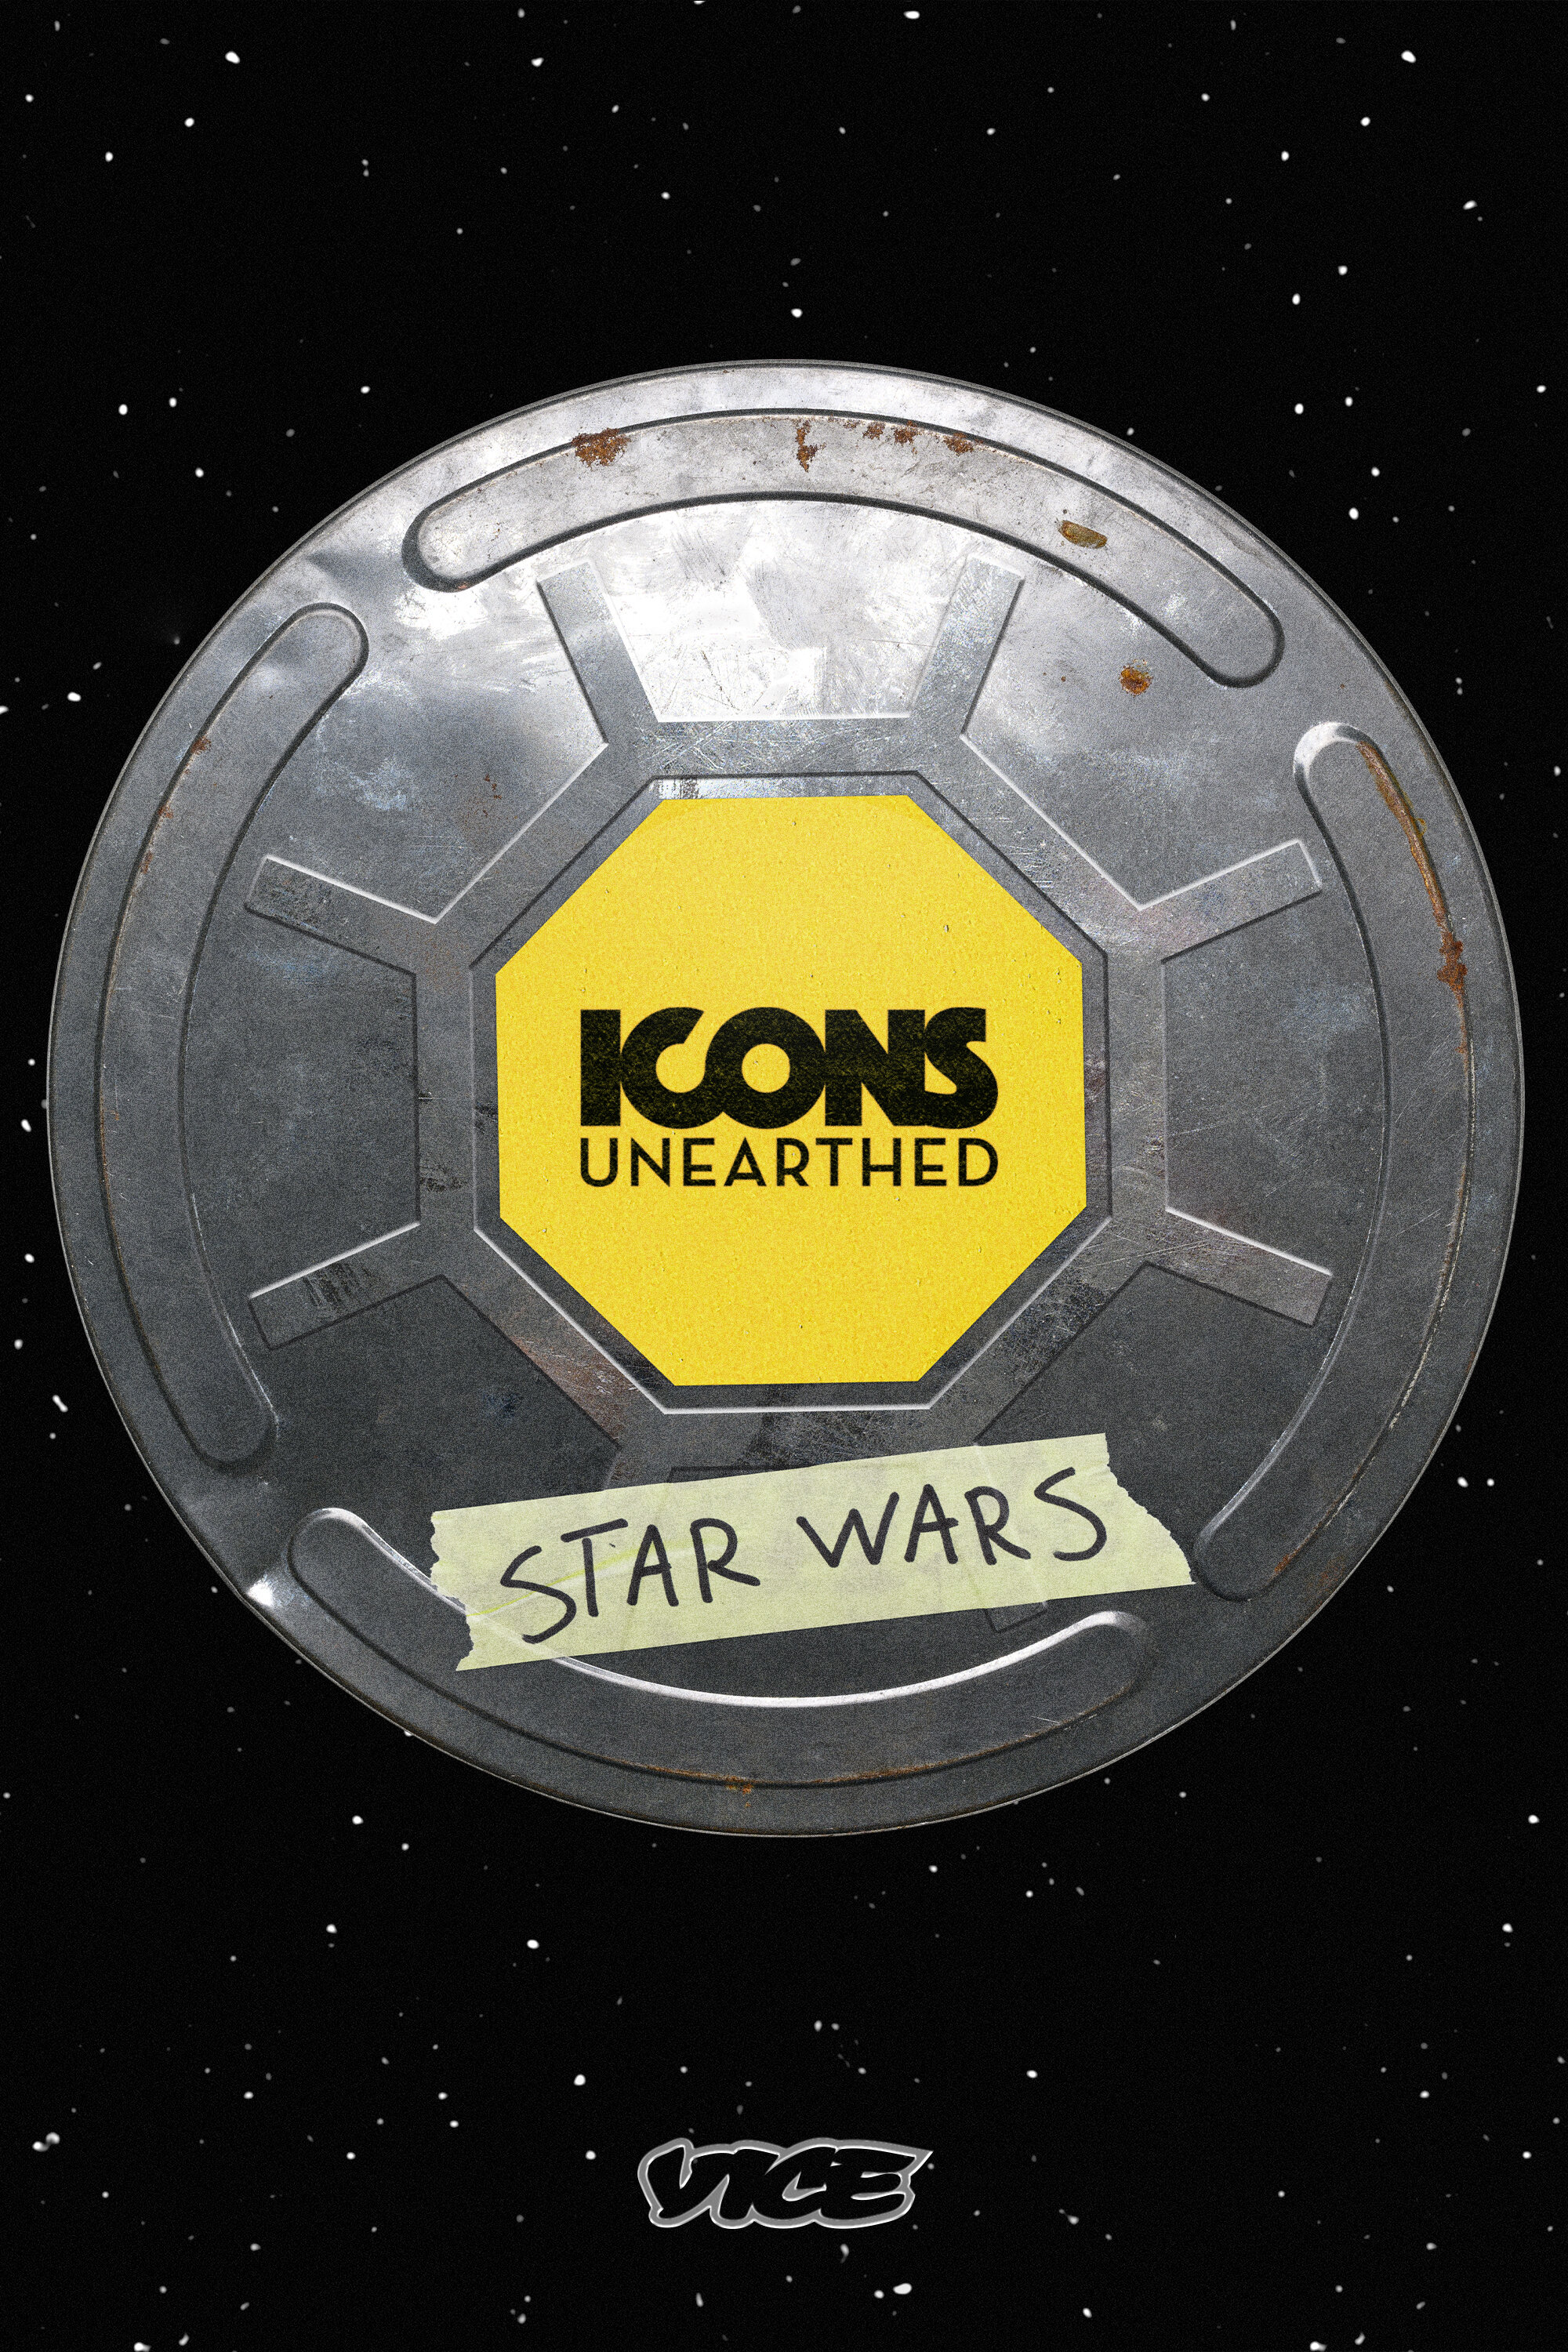 Icons Unearthed: Star Wars ne zaman